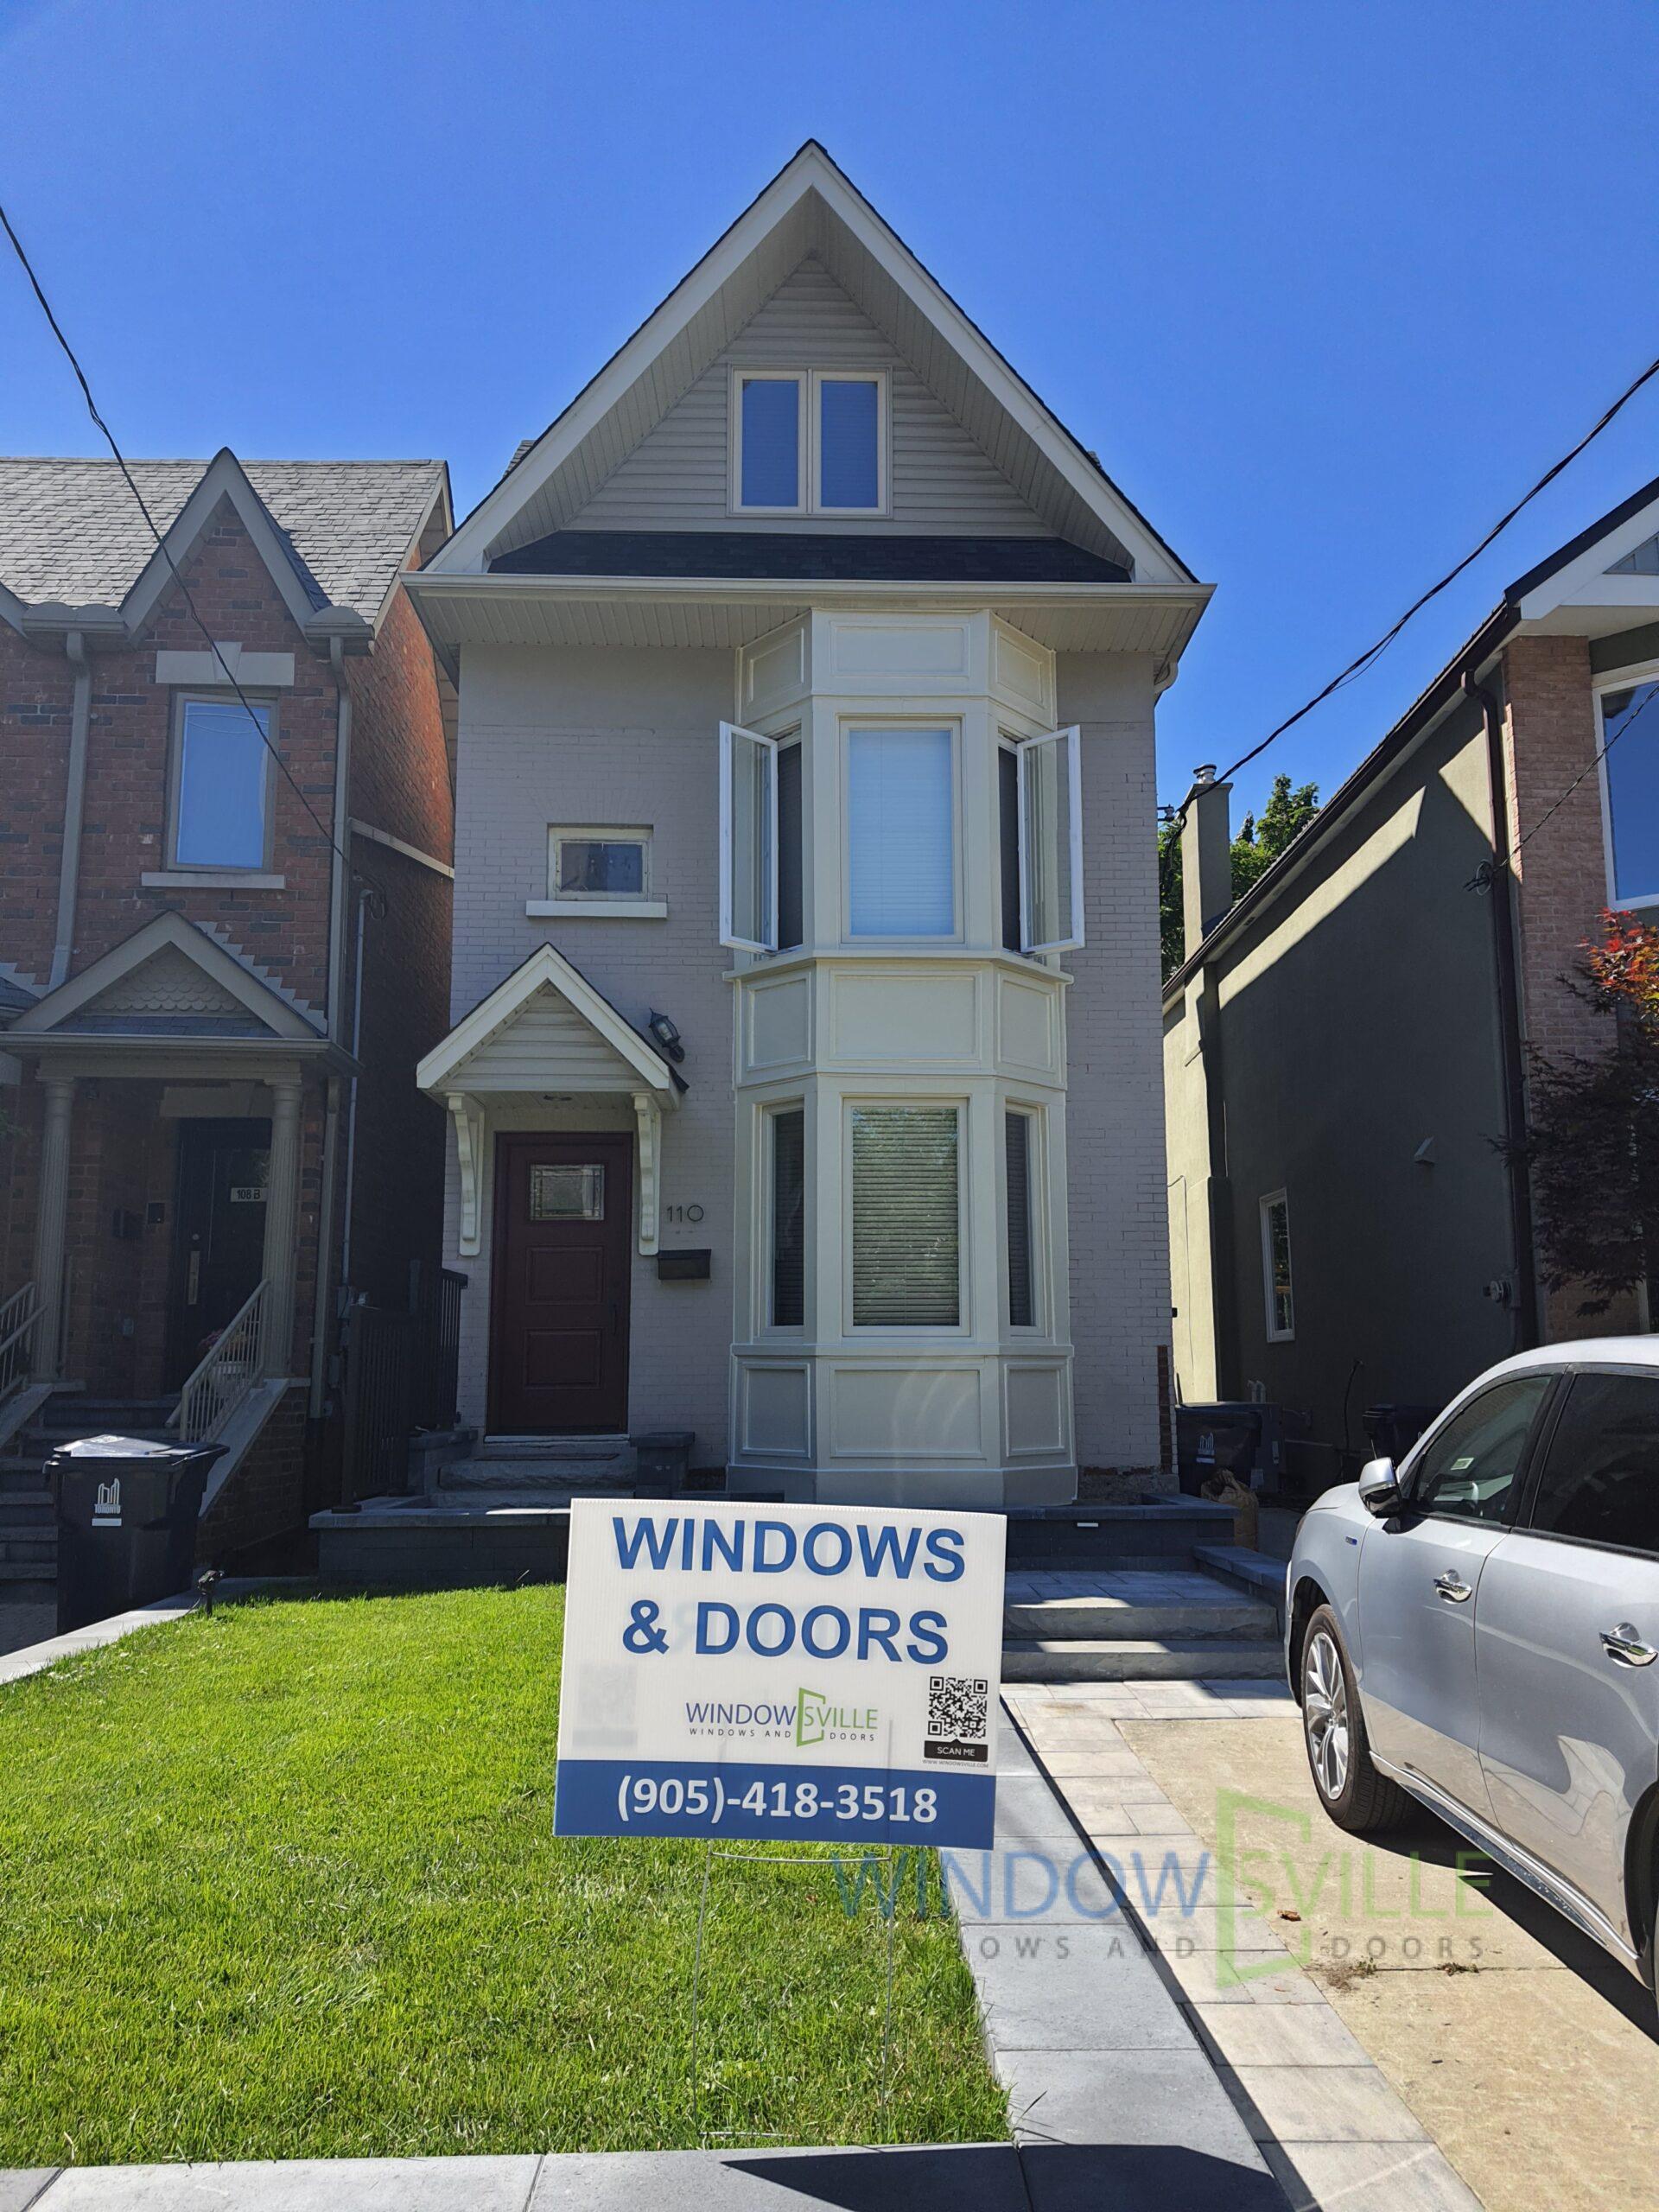 Casement windows replacement with multipoint locking system North York